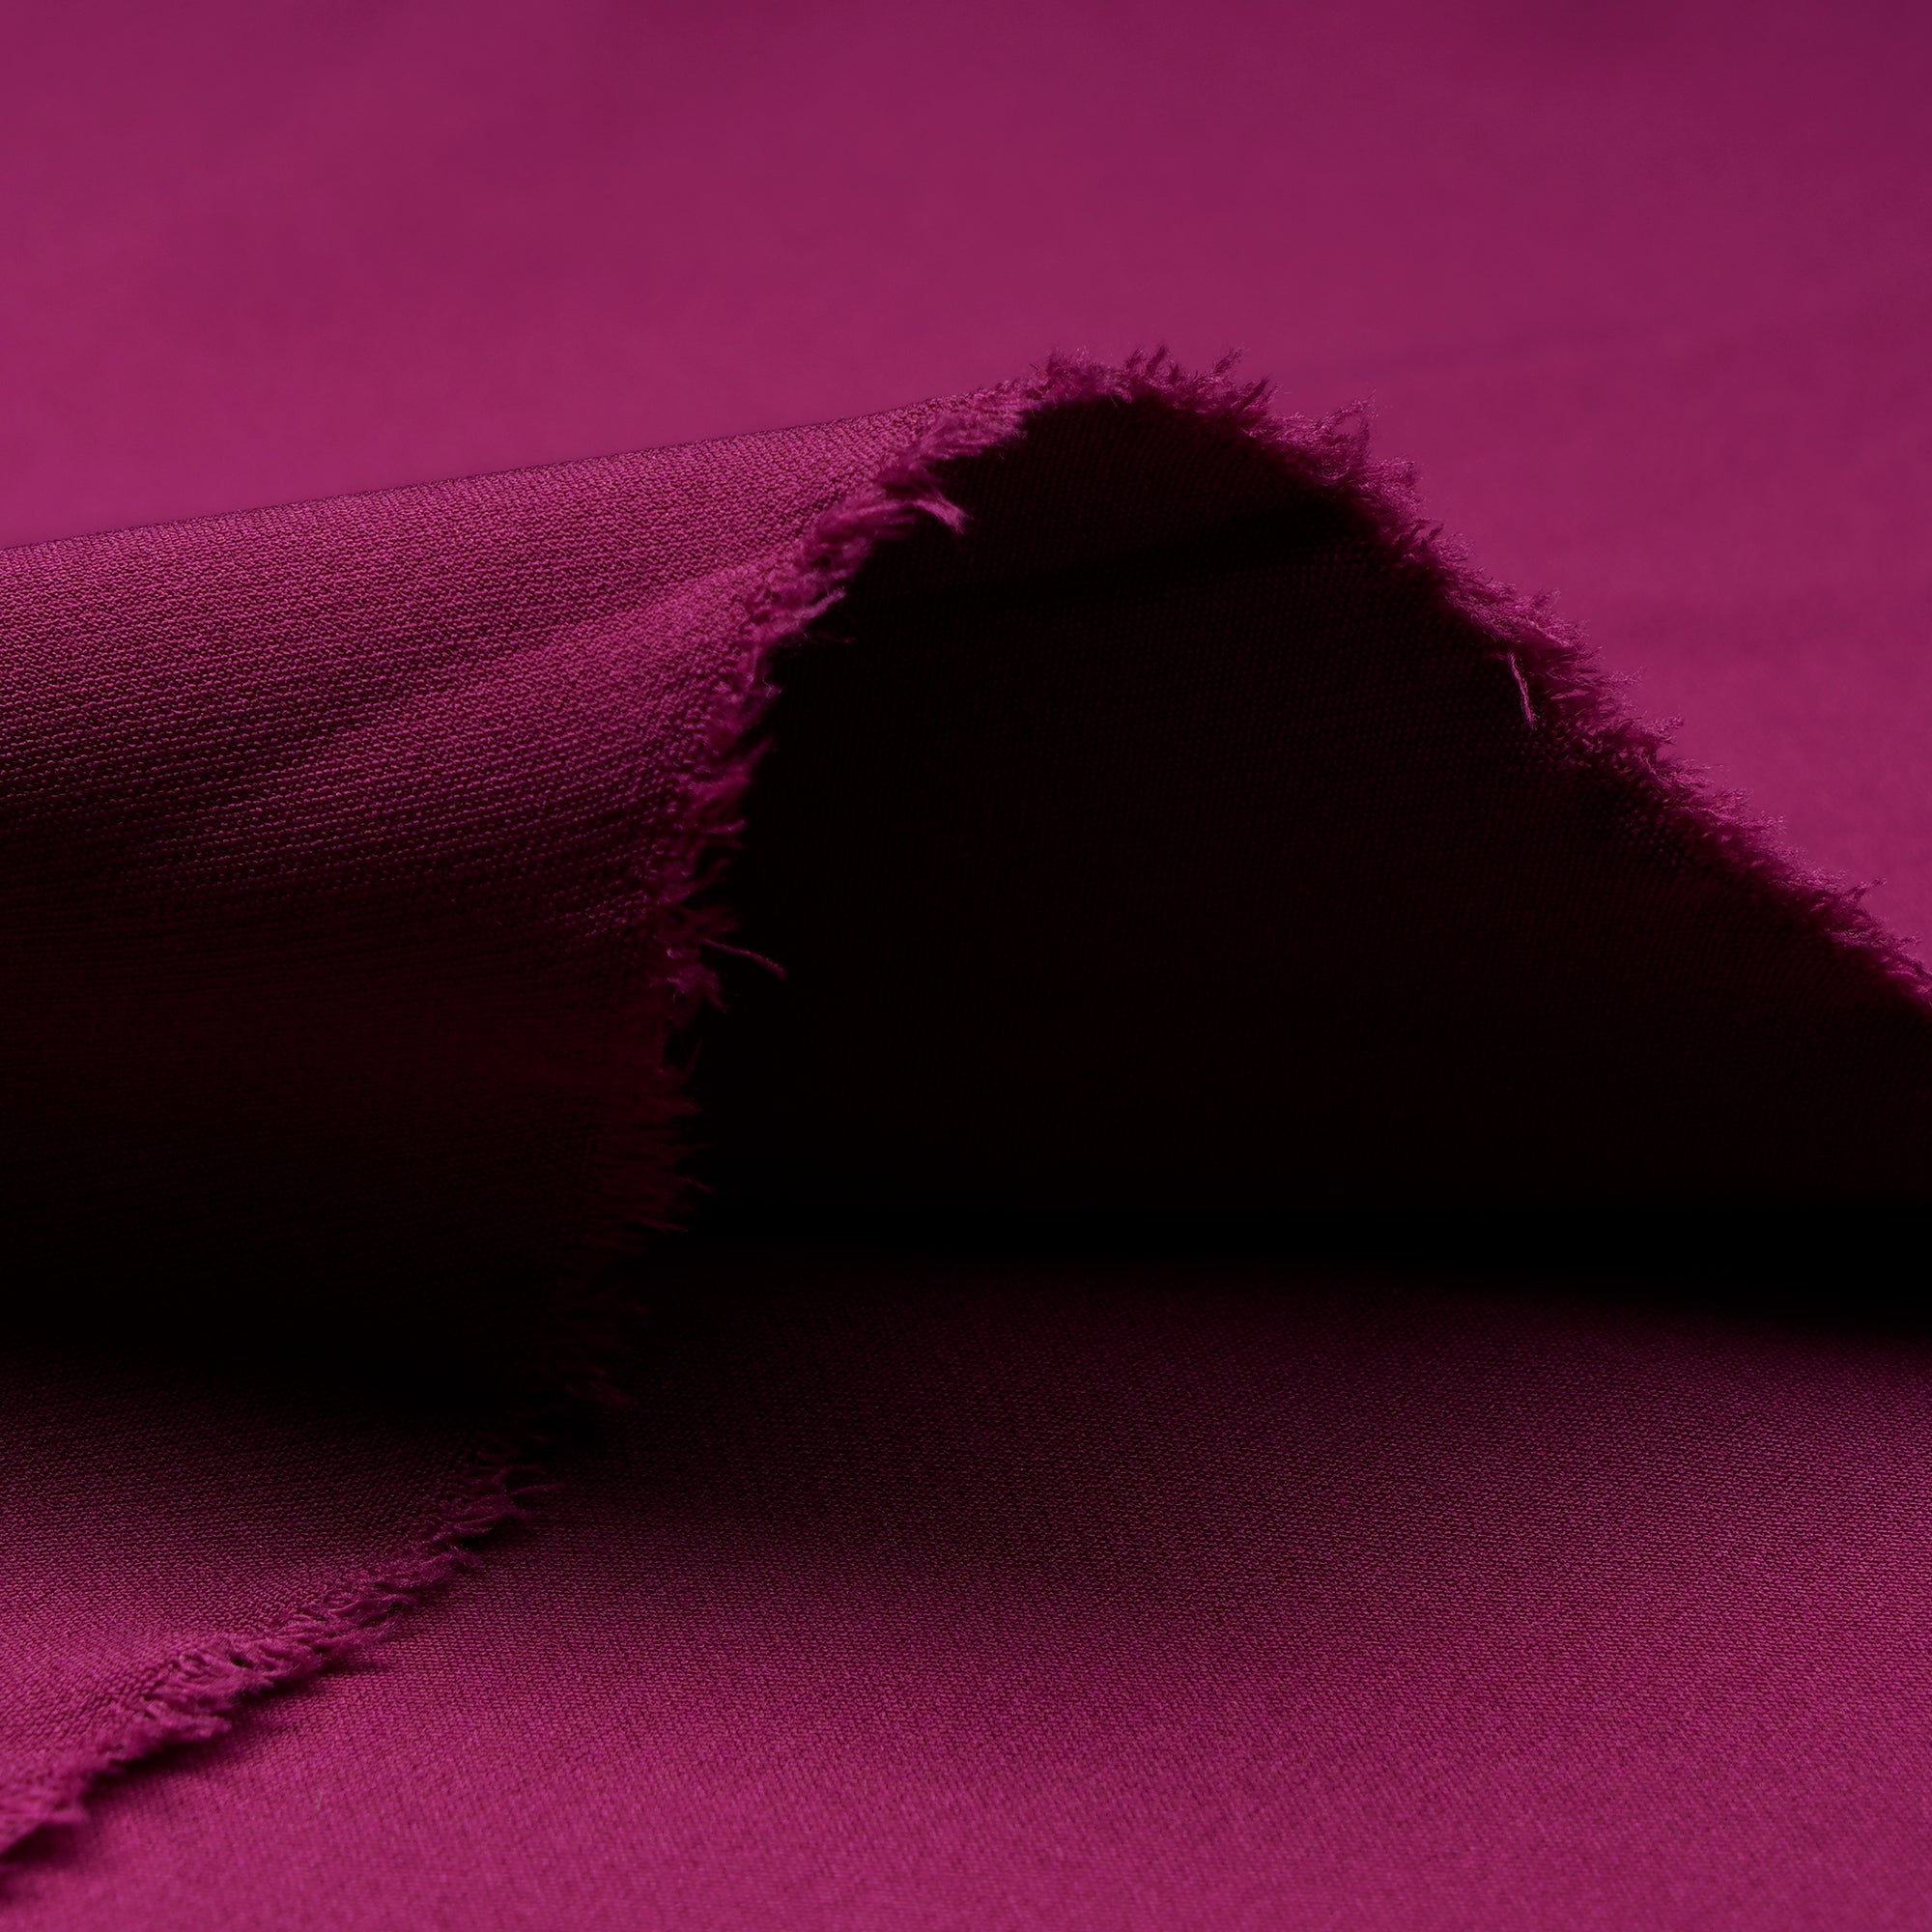 Magenta Solid Dyed Imported Banana Crepe Fabric (60" Width)